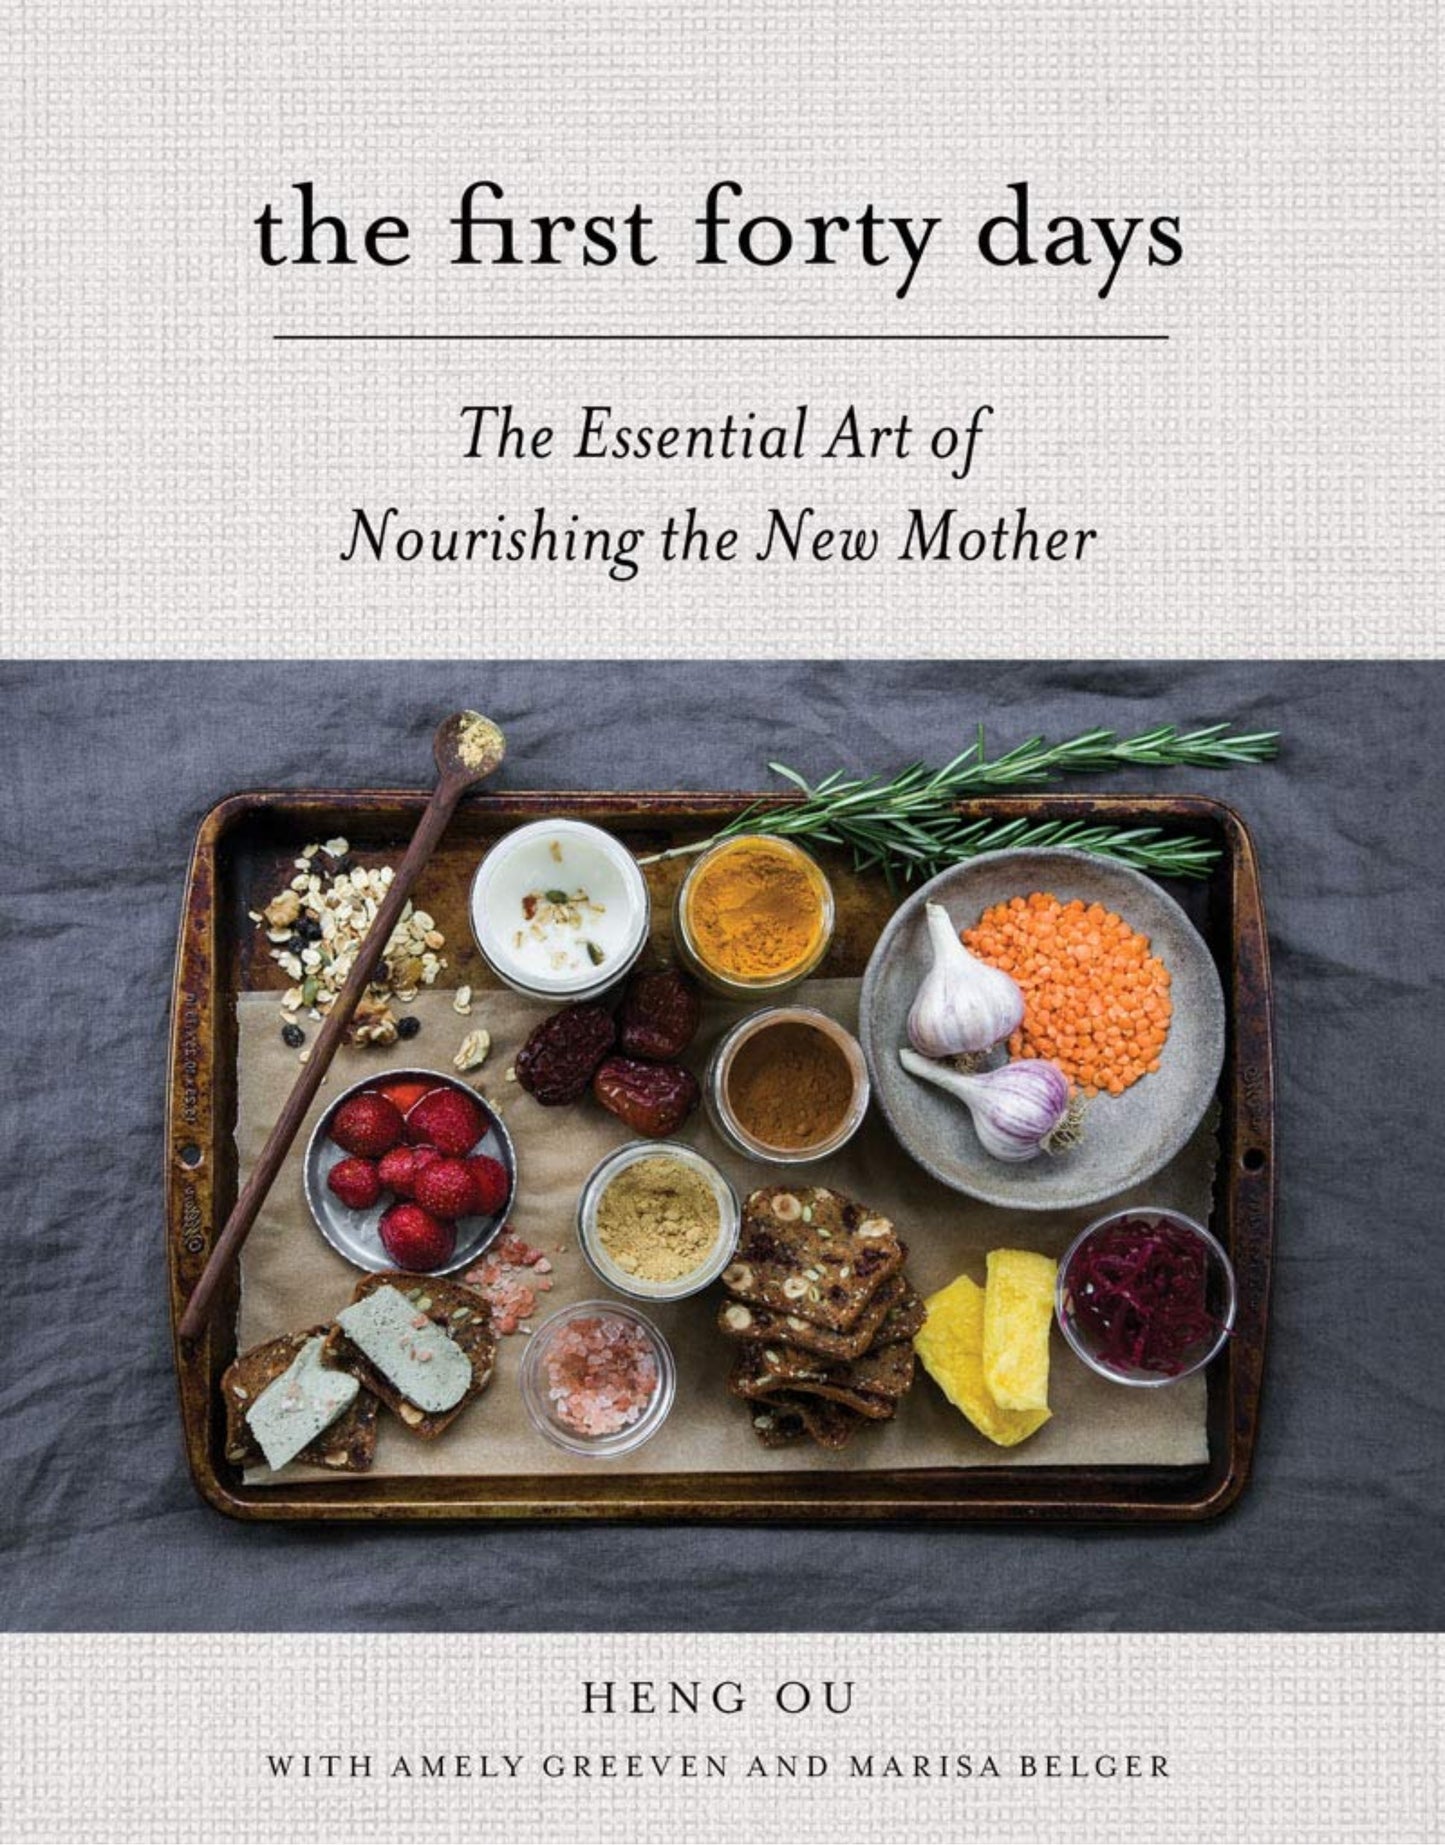 The First Forty Days: The Essential Art of Nourishing the New Mother / Heng Ou